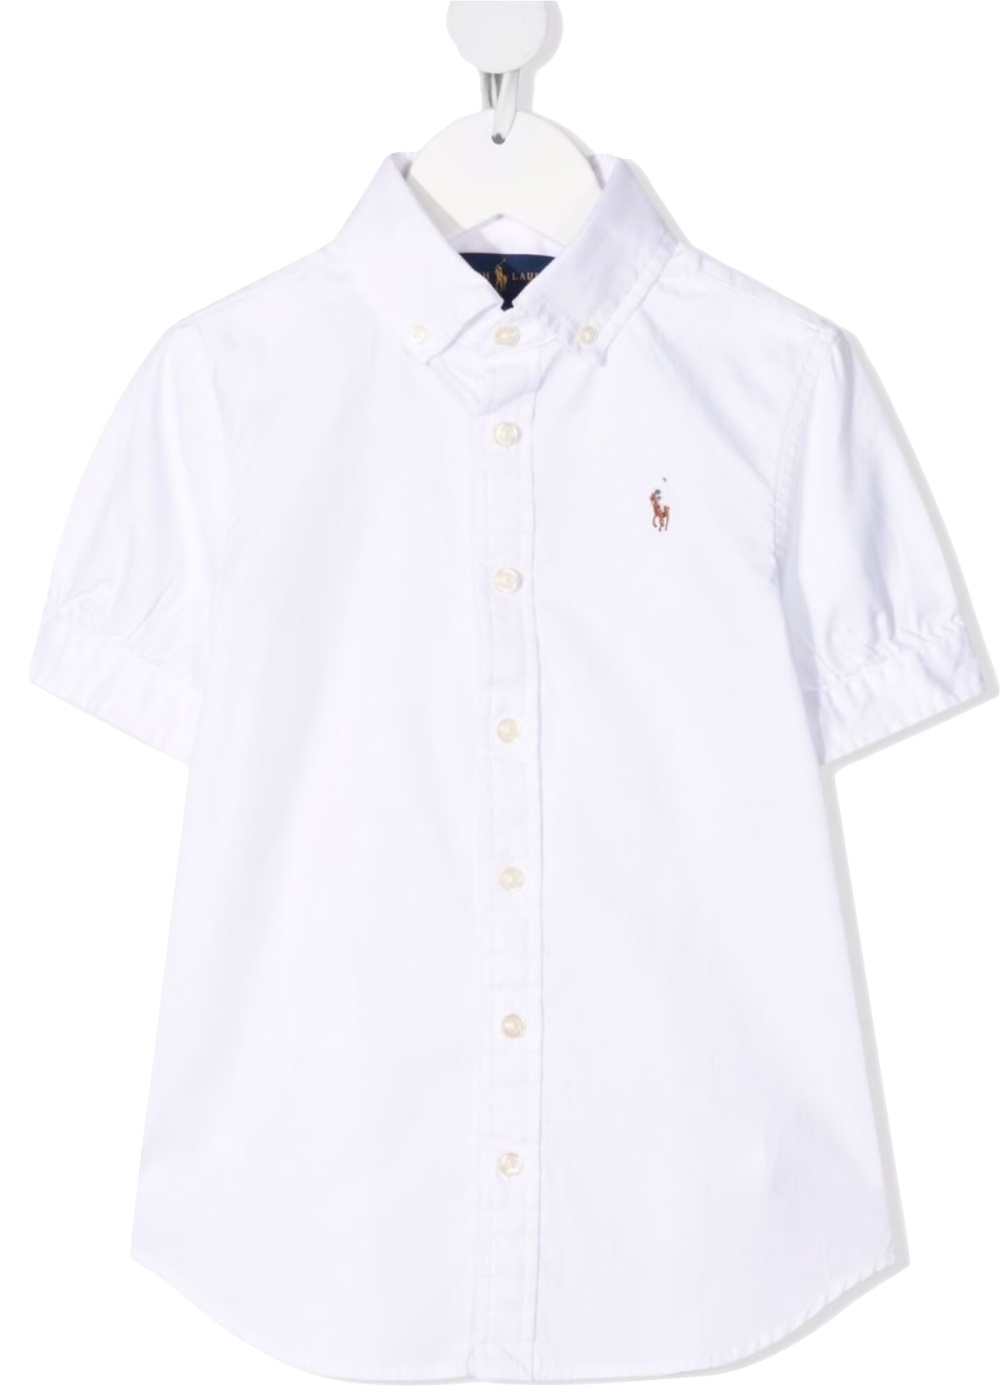 Featured image for “POLO RALPH LAUREN SLIM-FIT”